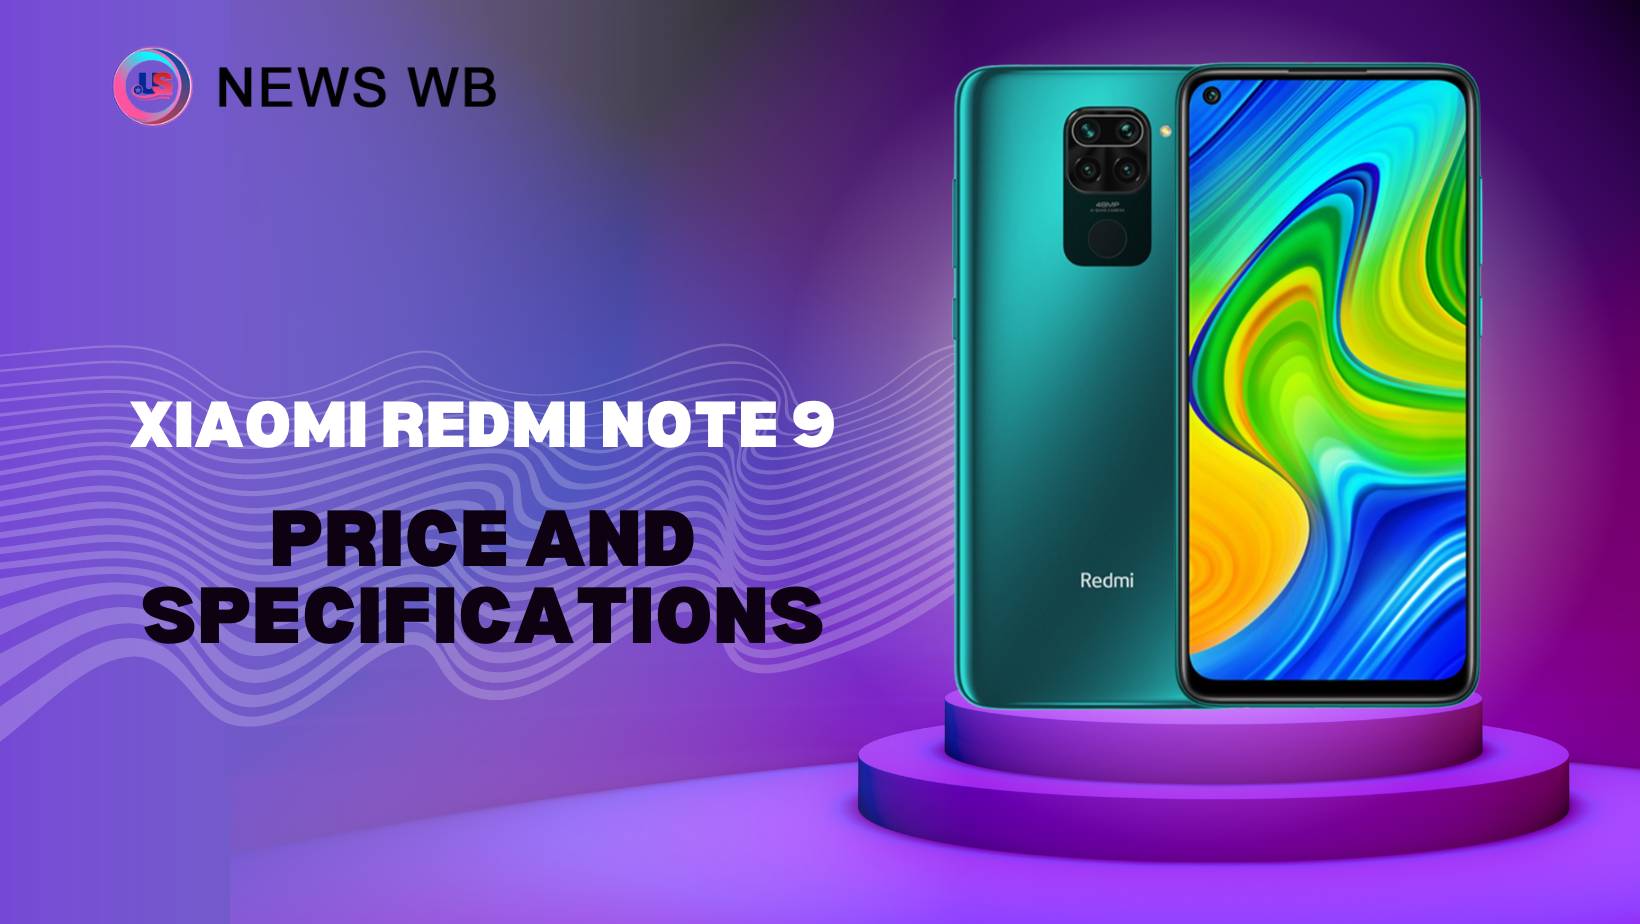 Xiaomi Redmi Note 9 Price and Specifications